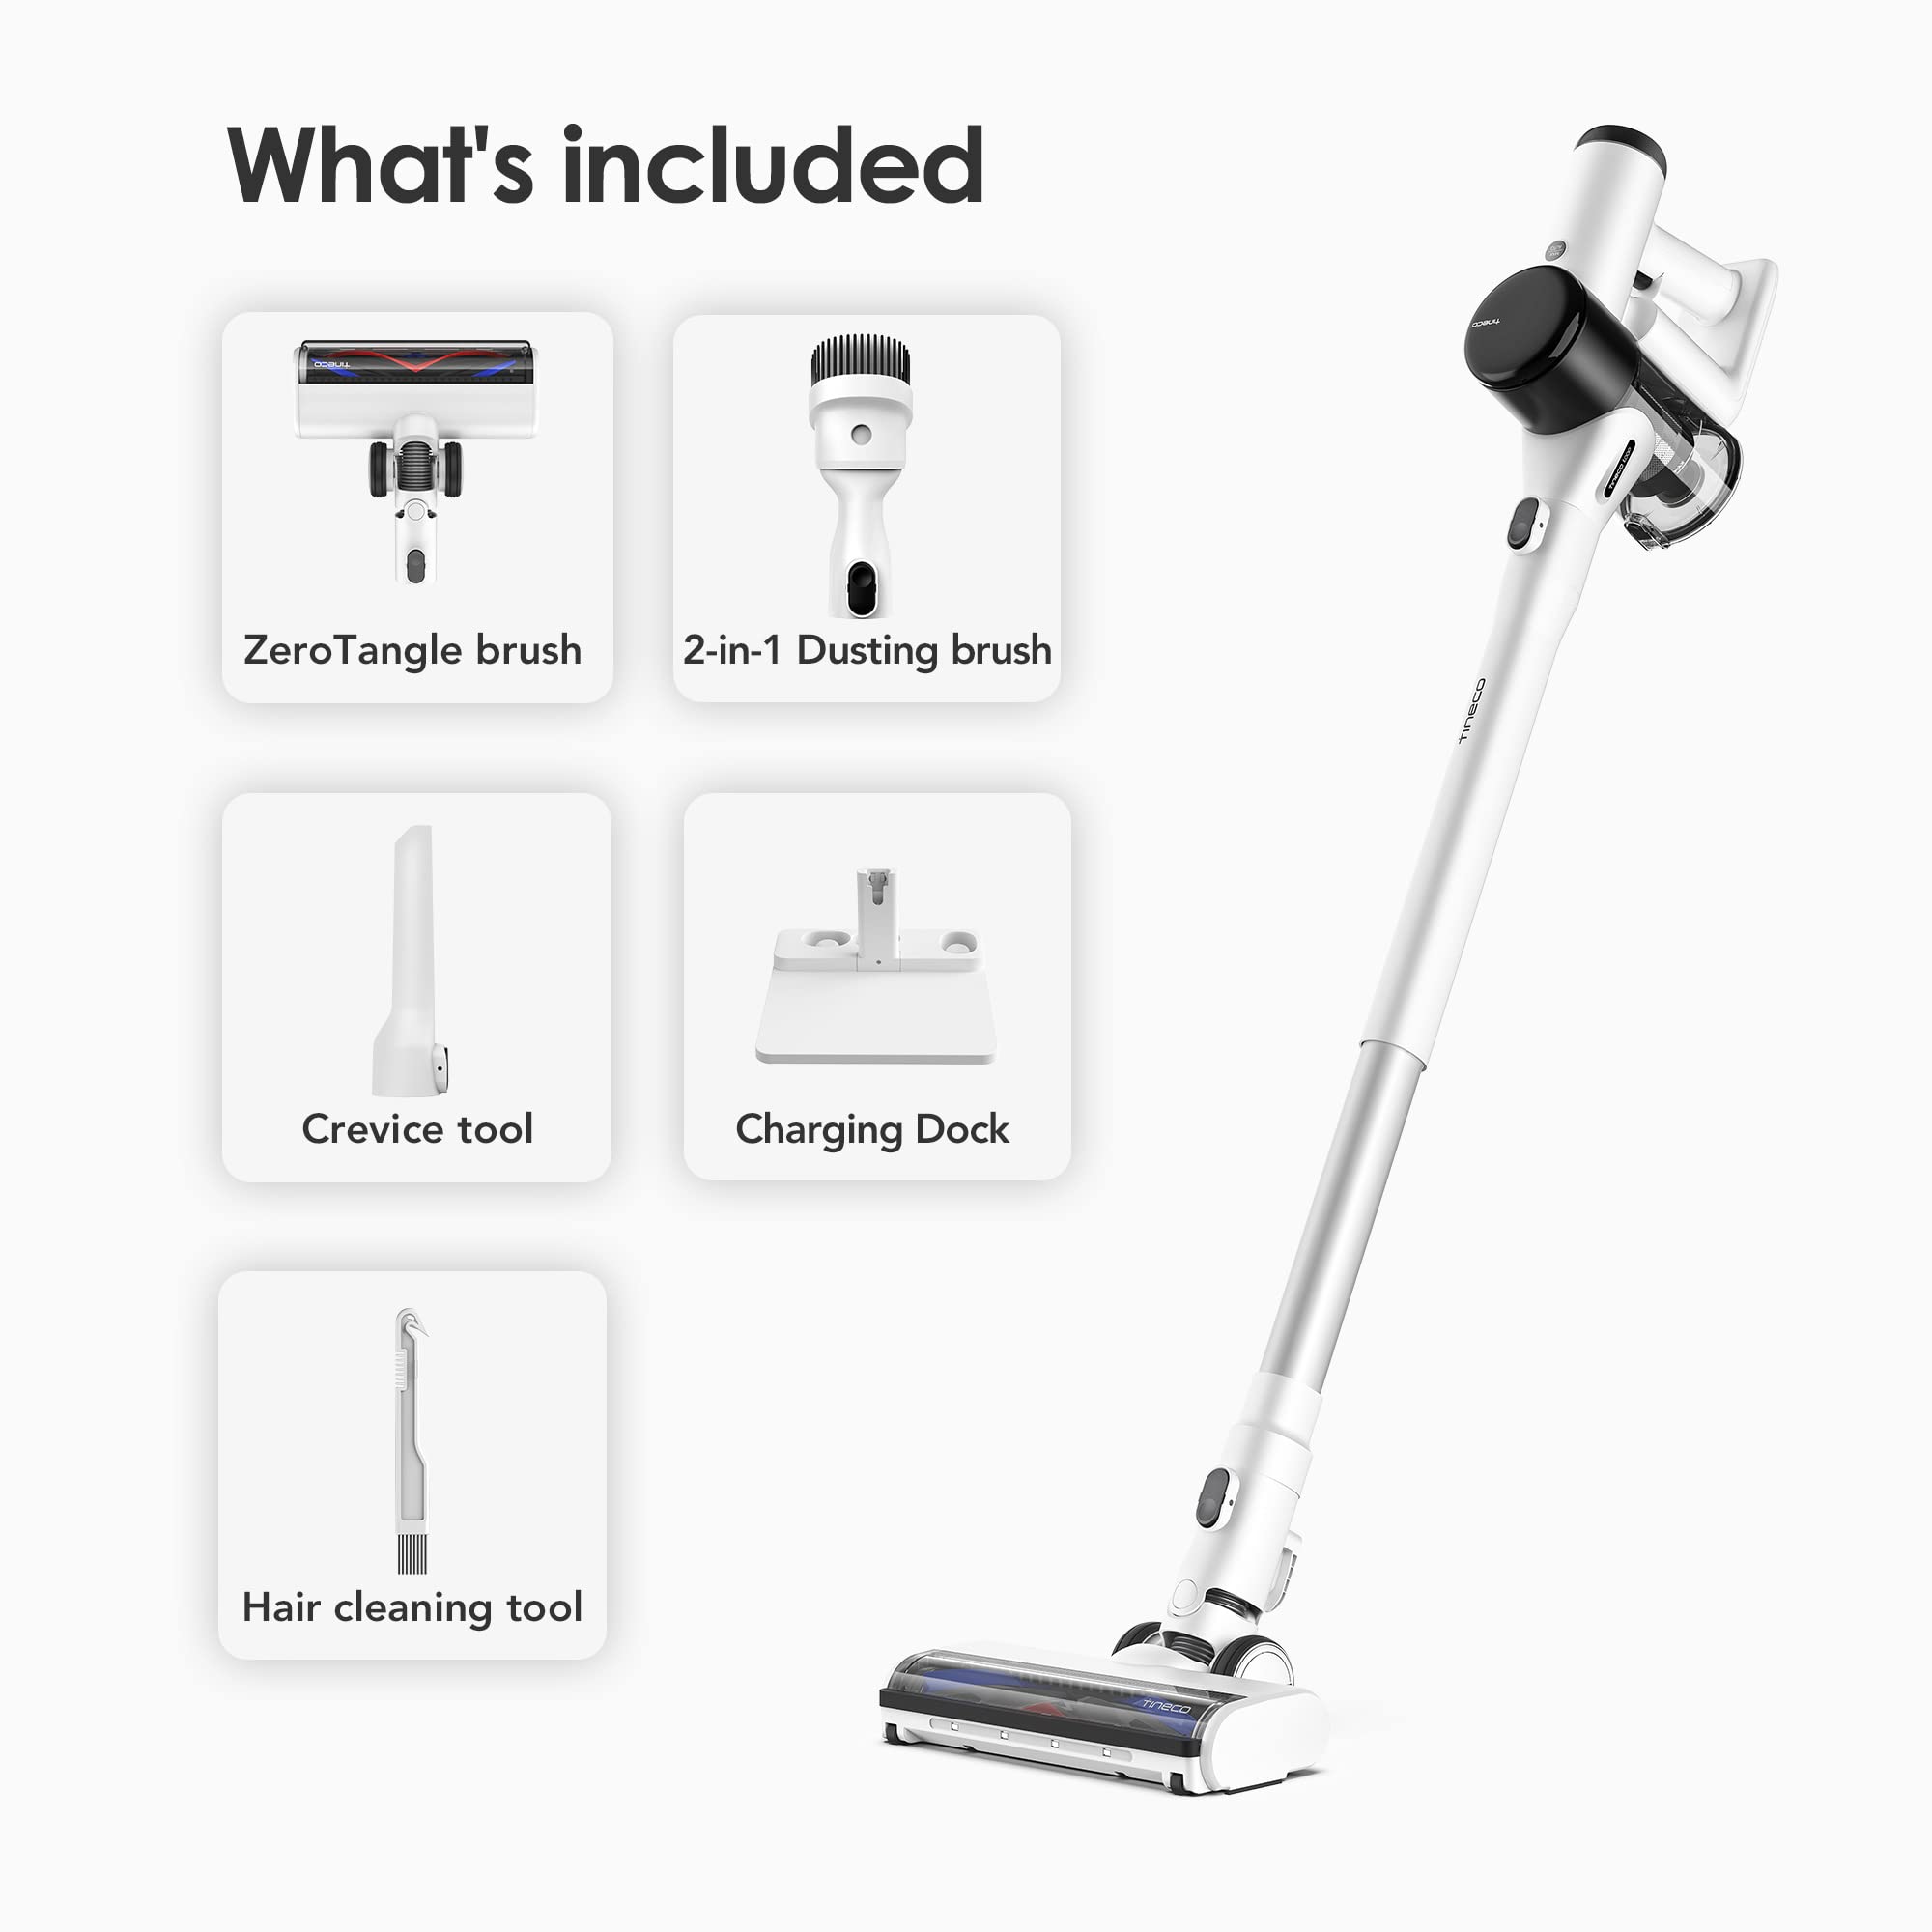 Tineco Pure ONE AIR Cordless Smart Vacuum Cleaner, Powerful Suction, Patented Pure Cyclone Technology, Ultra-Light Weight Hand Held Vacuum, Super-Quiet Cord Free Vacuum Cleaner